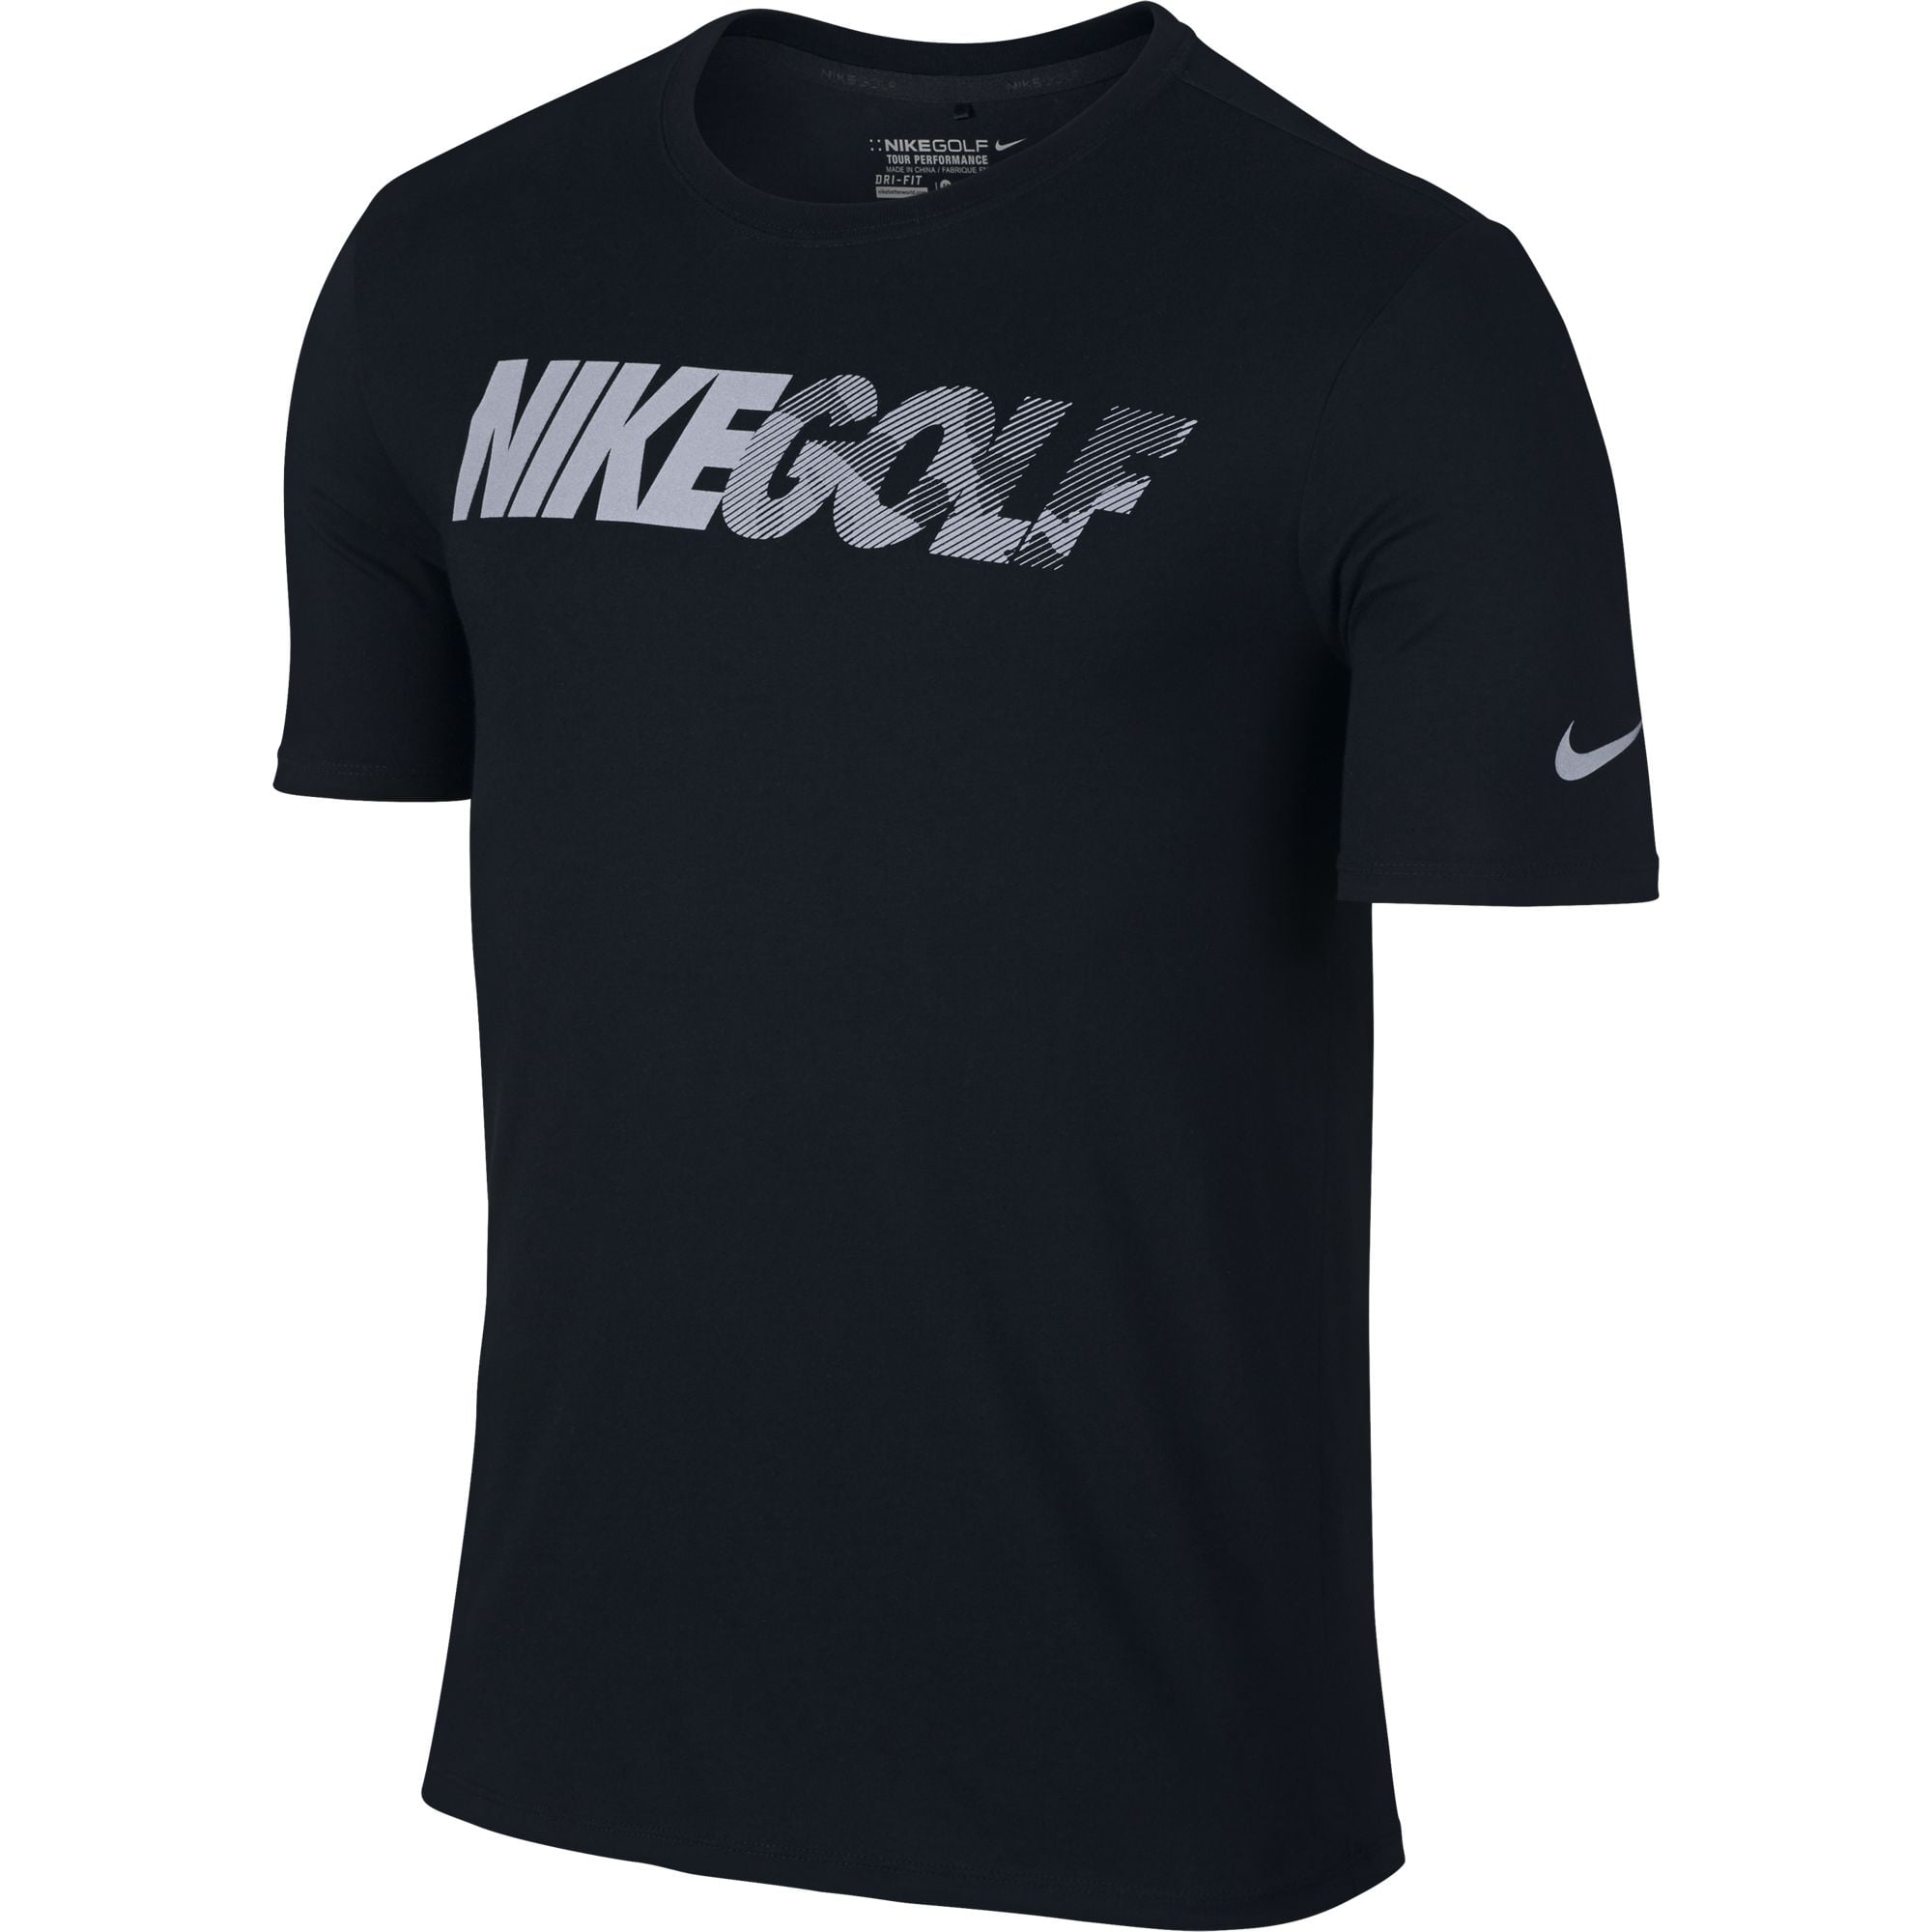 NEW Nike Golf  Graphic Tee  Black Reflective Silver Large 